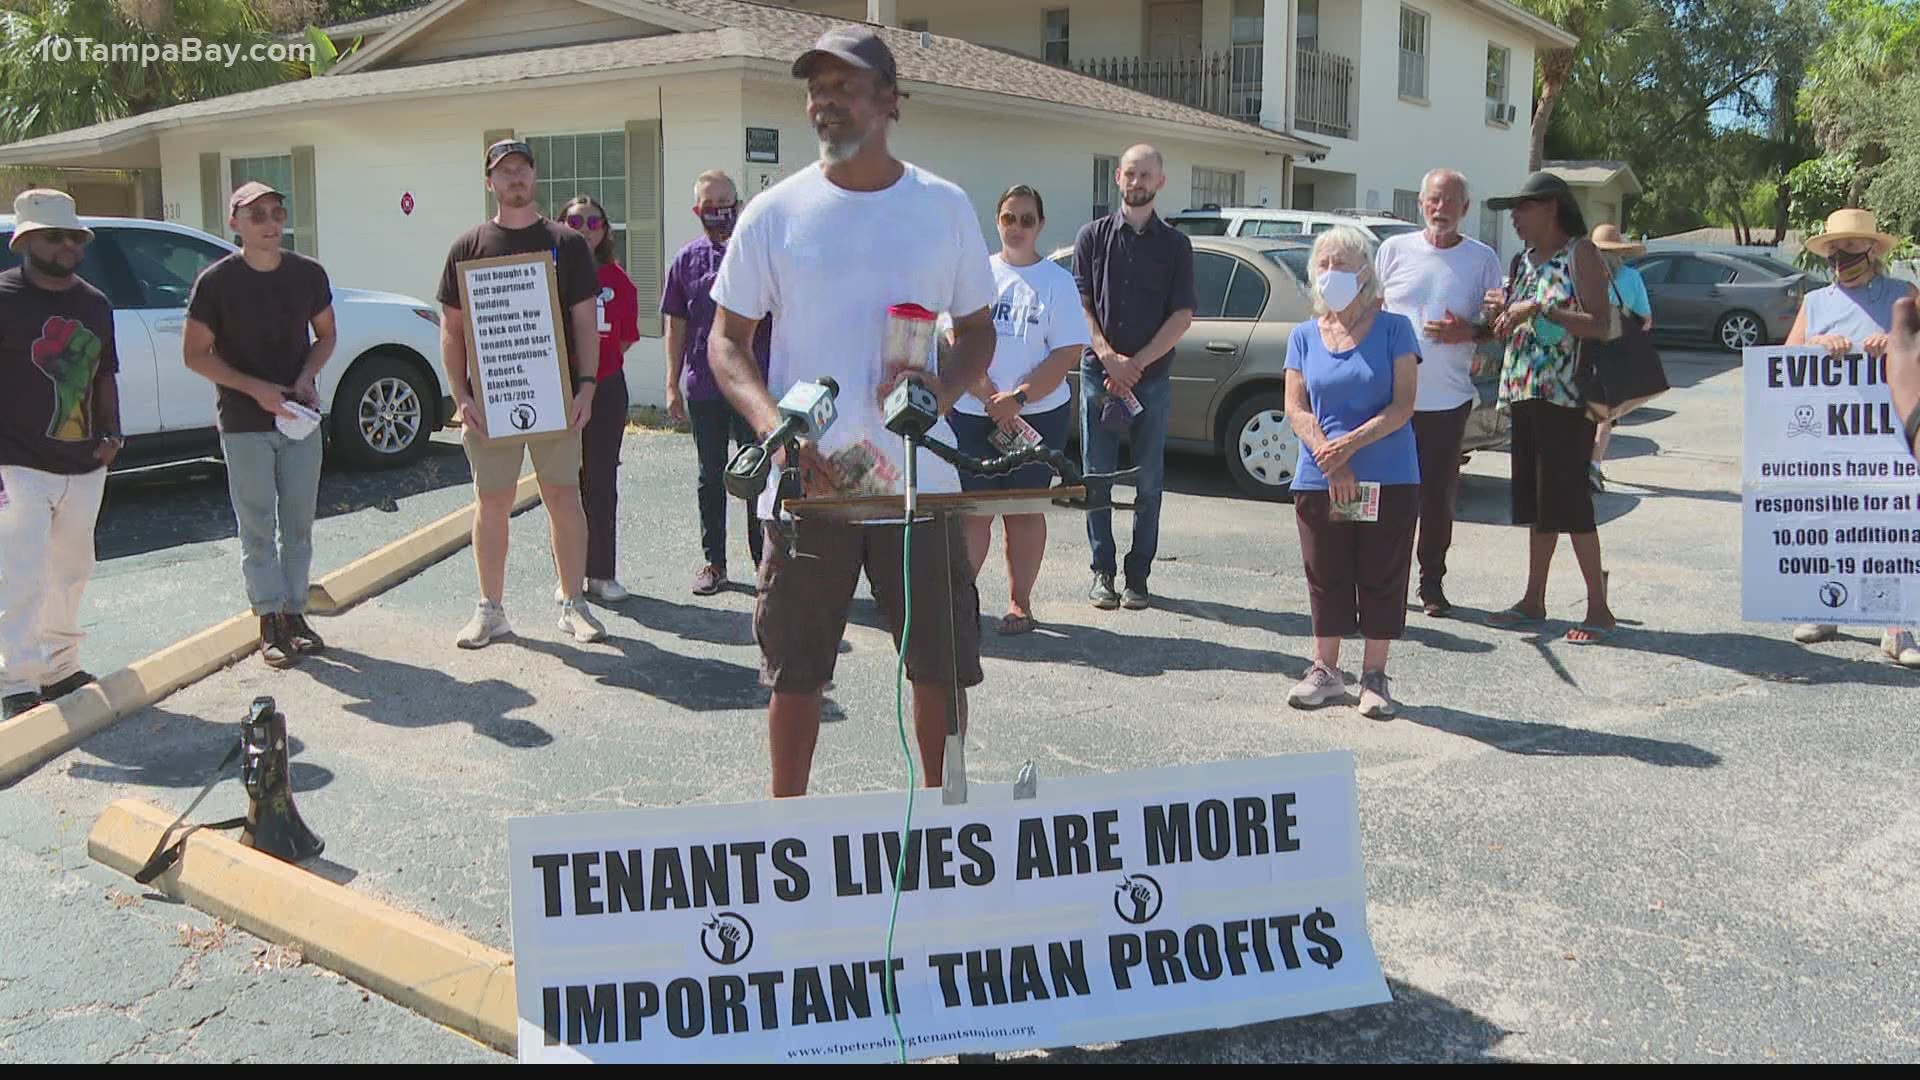 The evictions were filed shortly after City Council member Robert Blackmon took over the property but were dismissed after pressure from the St. Pete Tenants Union.